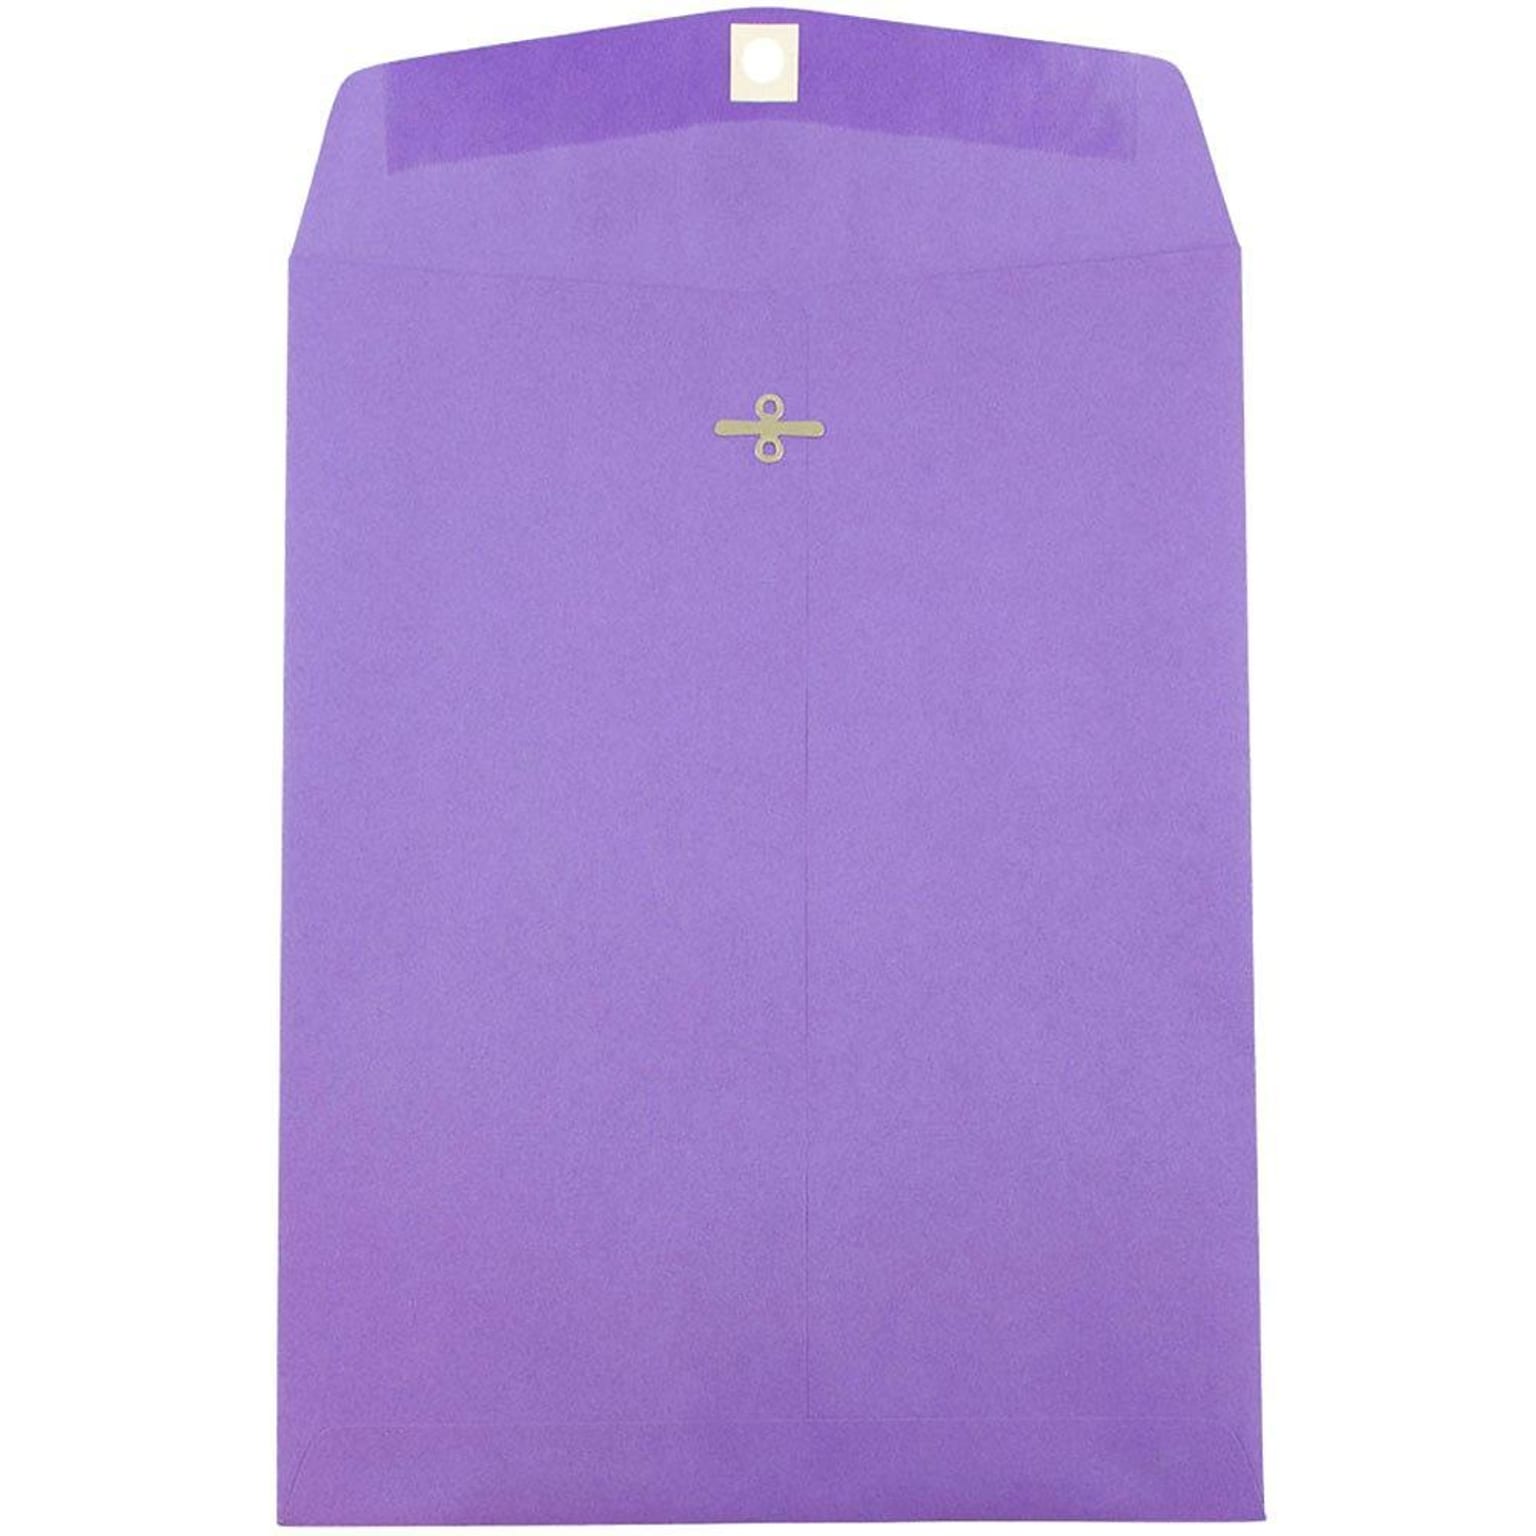 JAM Paper 10 x 13 Open End Catalog Colored Envelopes with Clasp Closure, Violet Purple Recycled, 100/Pack (V0128182)